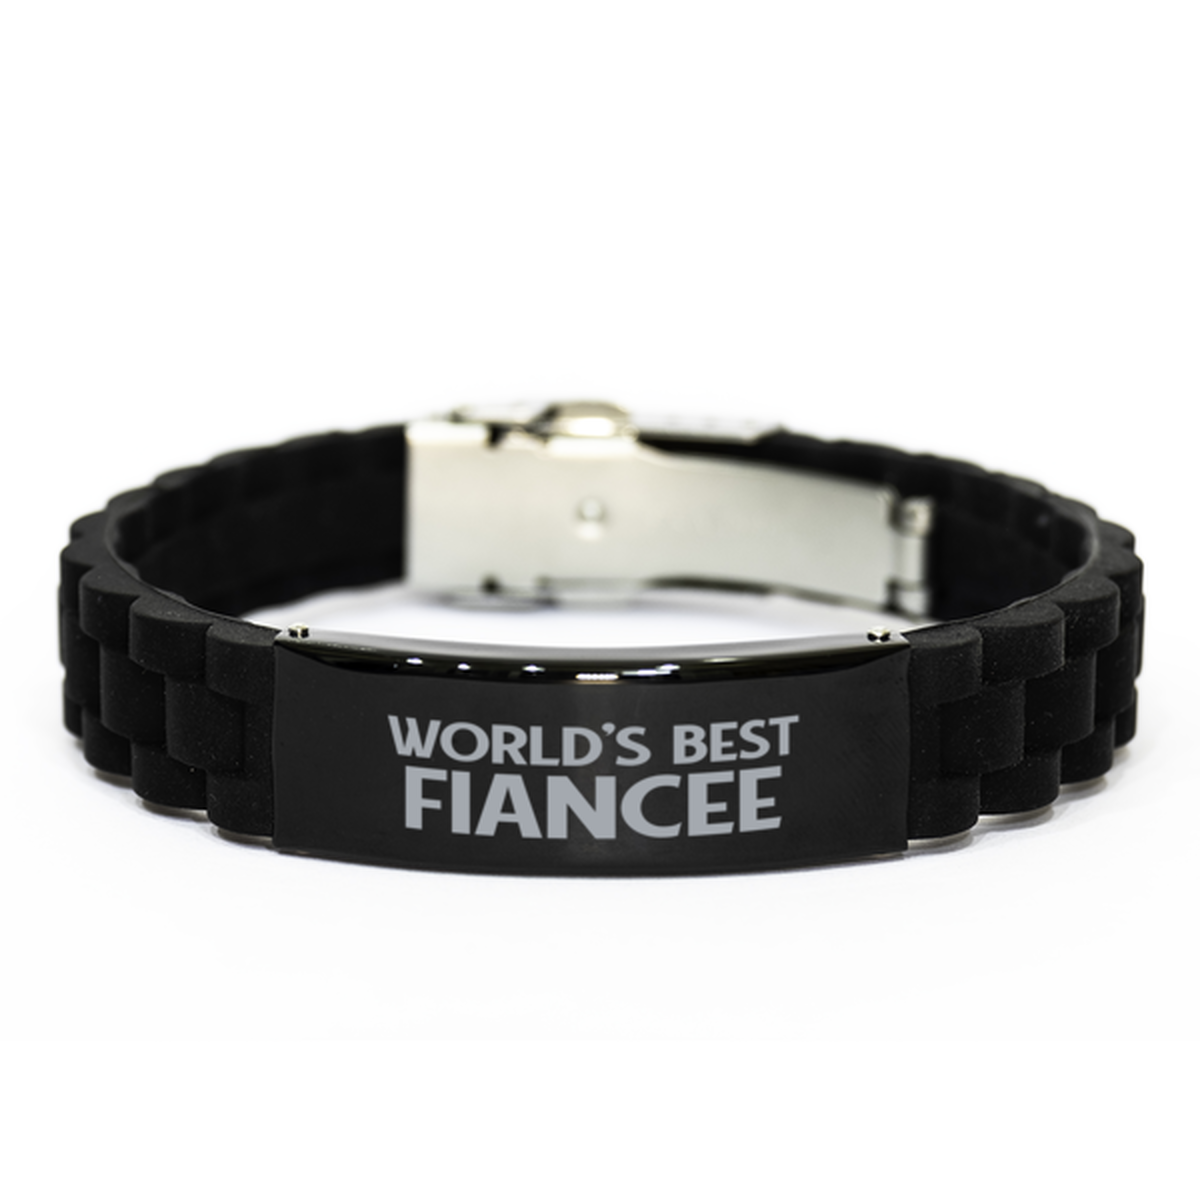 World's Best Fiancee Gifts, Funny Black Engraved Bracelet For Fiancee, Family Gifts For Women